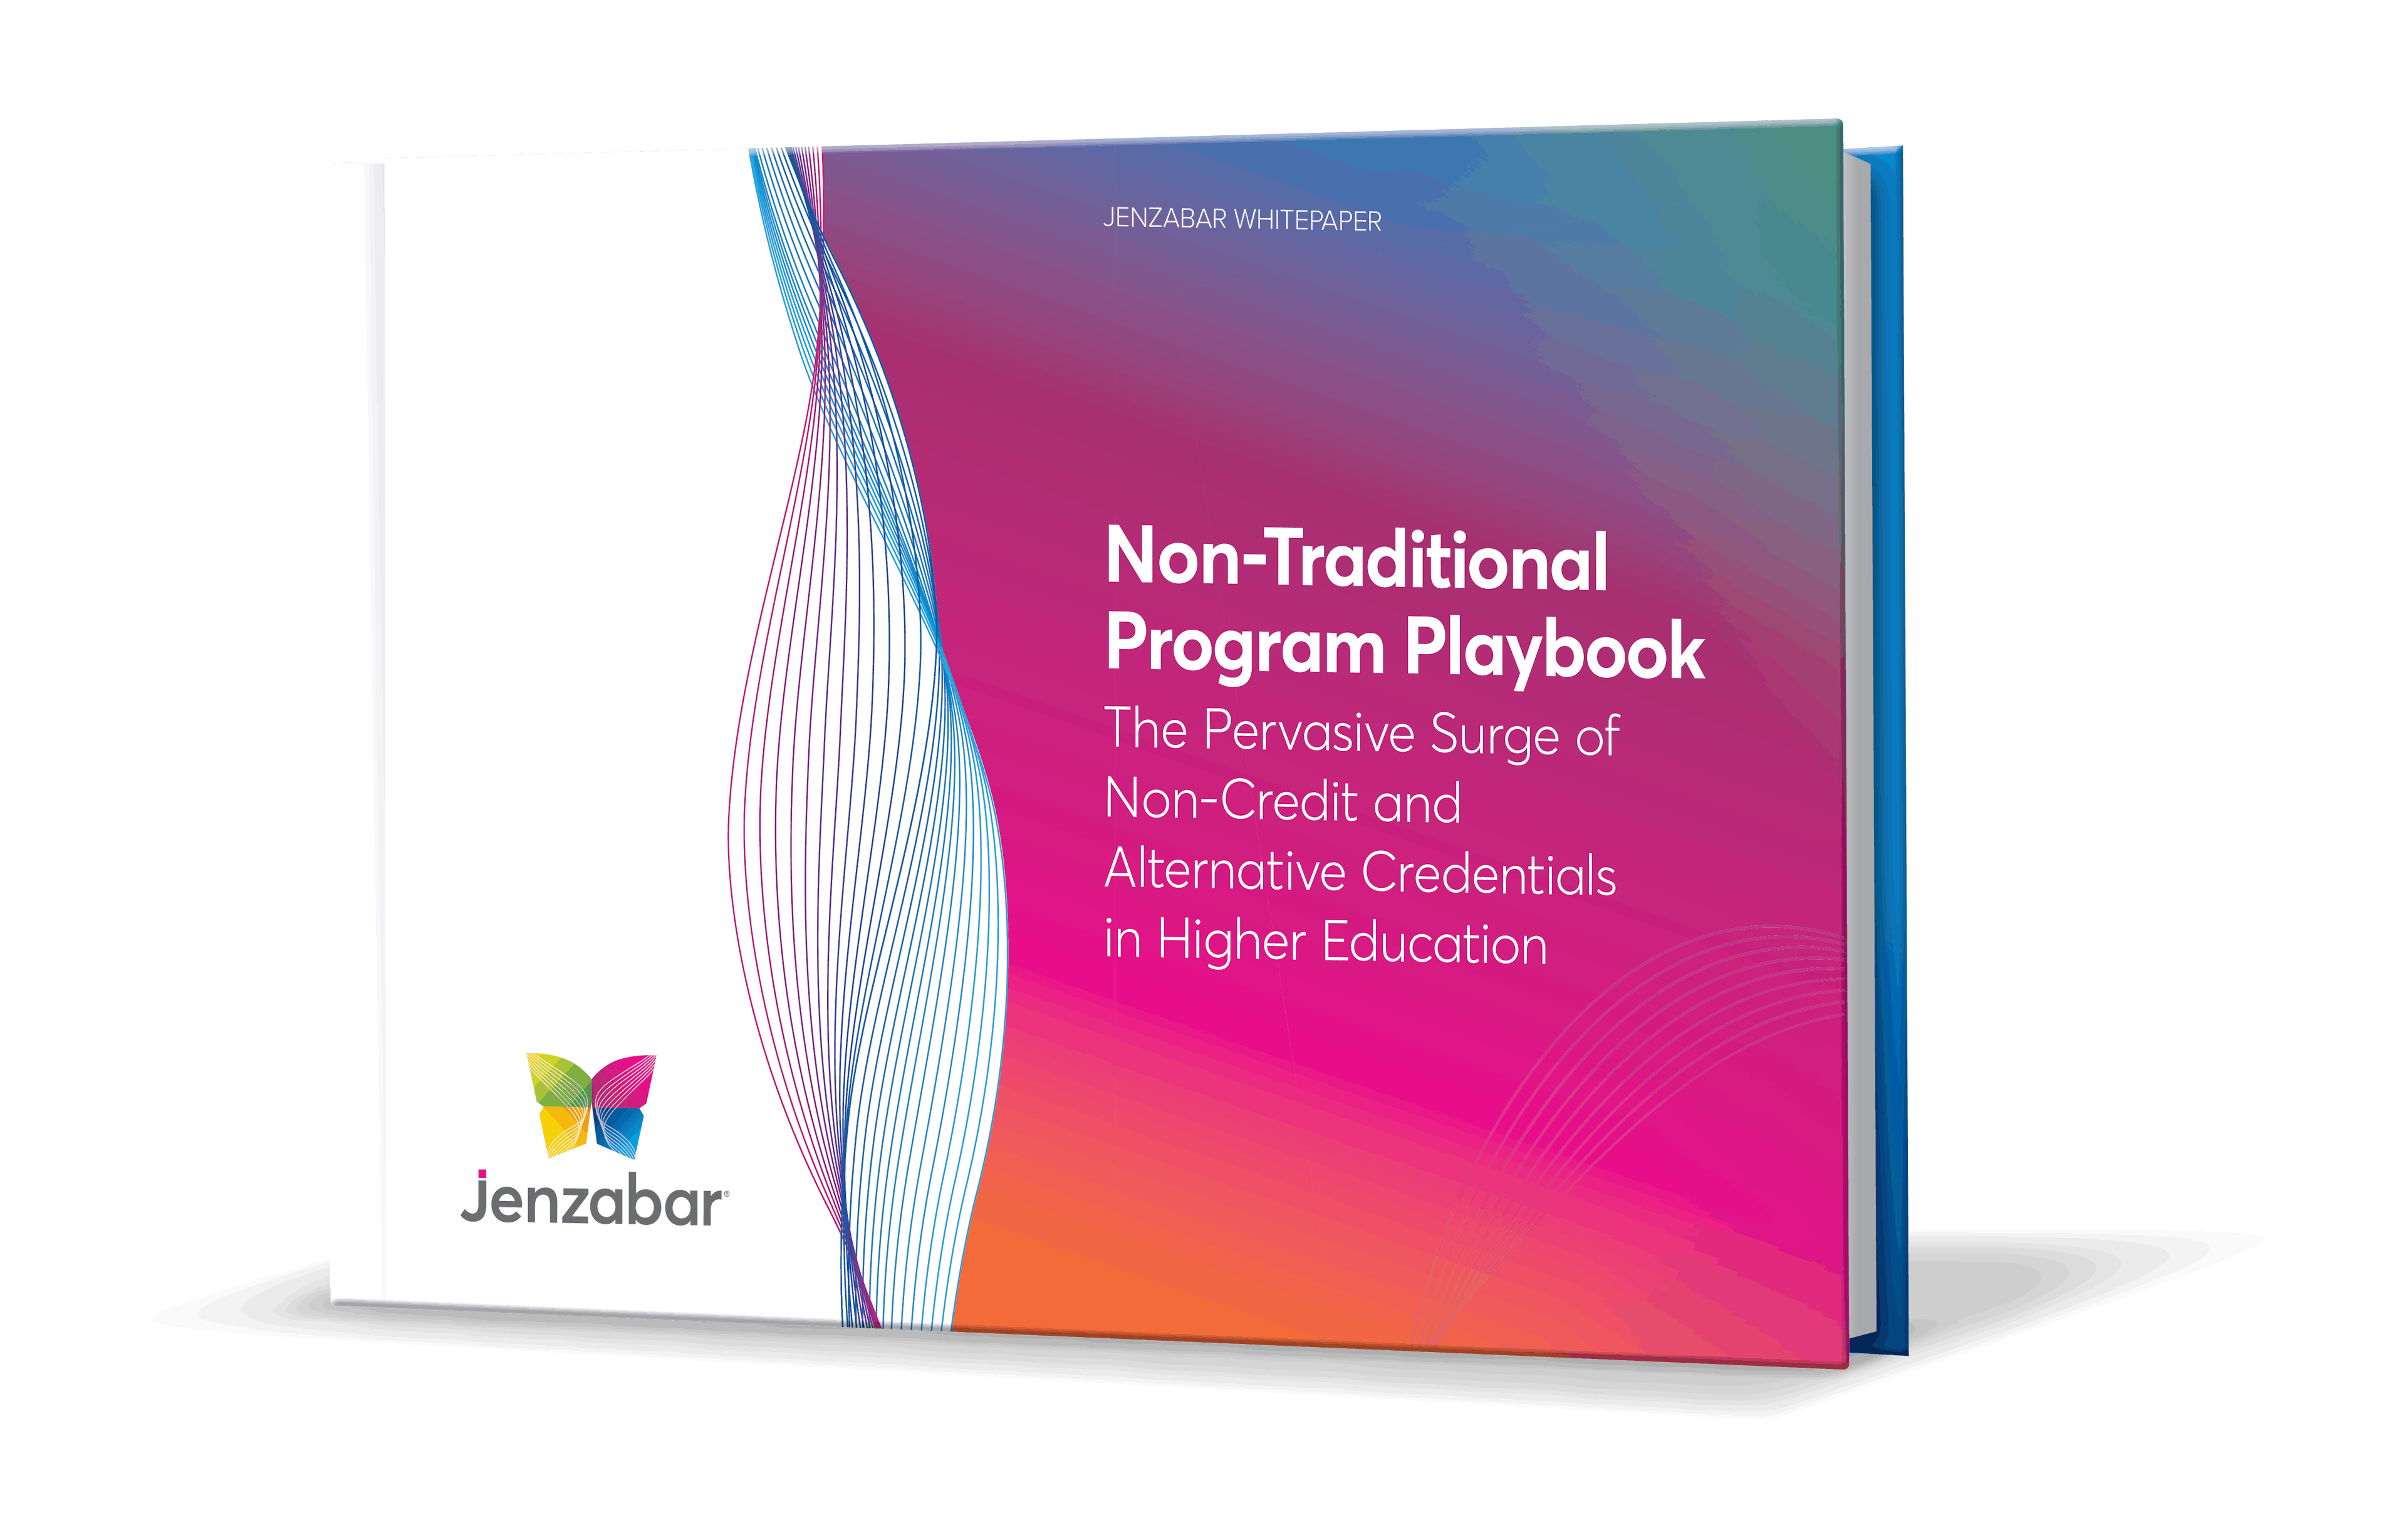 Non-Traditional Program Playbook: The Pervasive Surge of Non-Credit and Alternative Credentials in Higher Ed